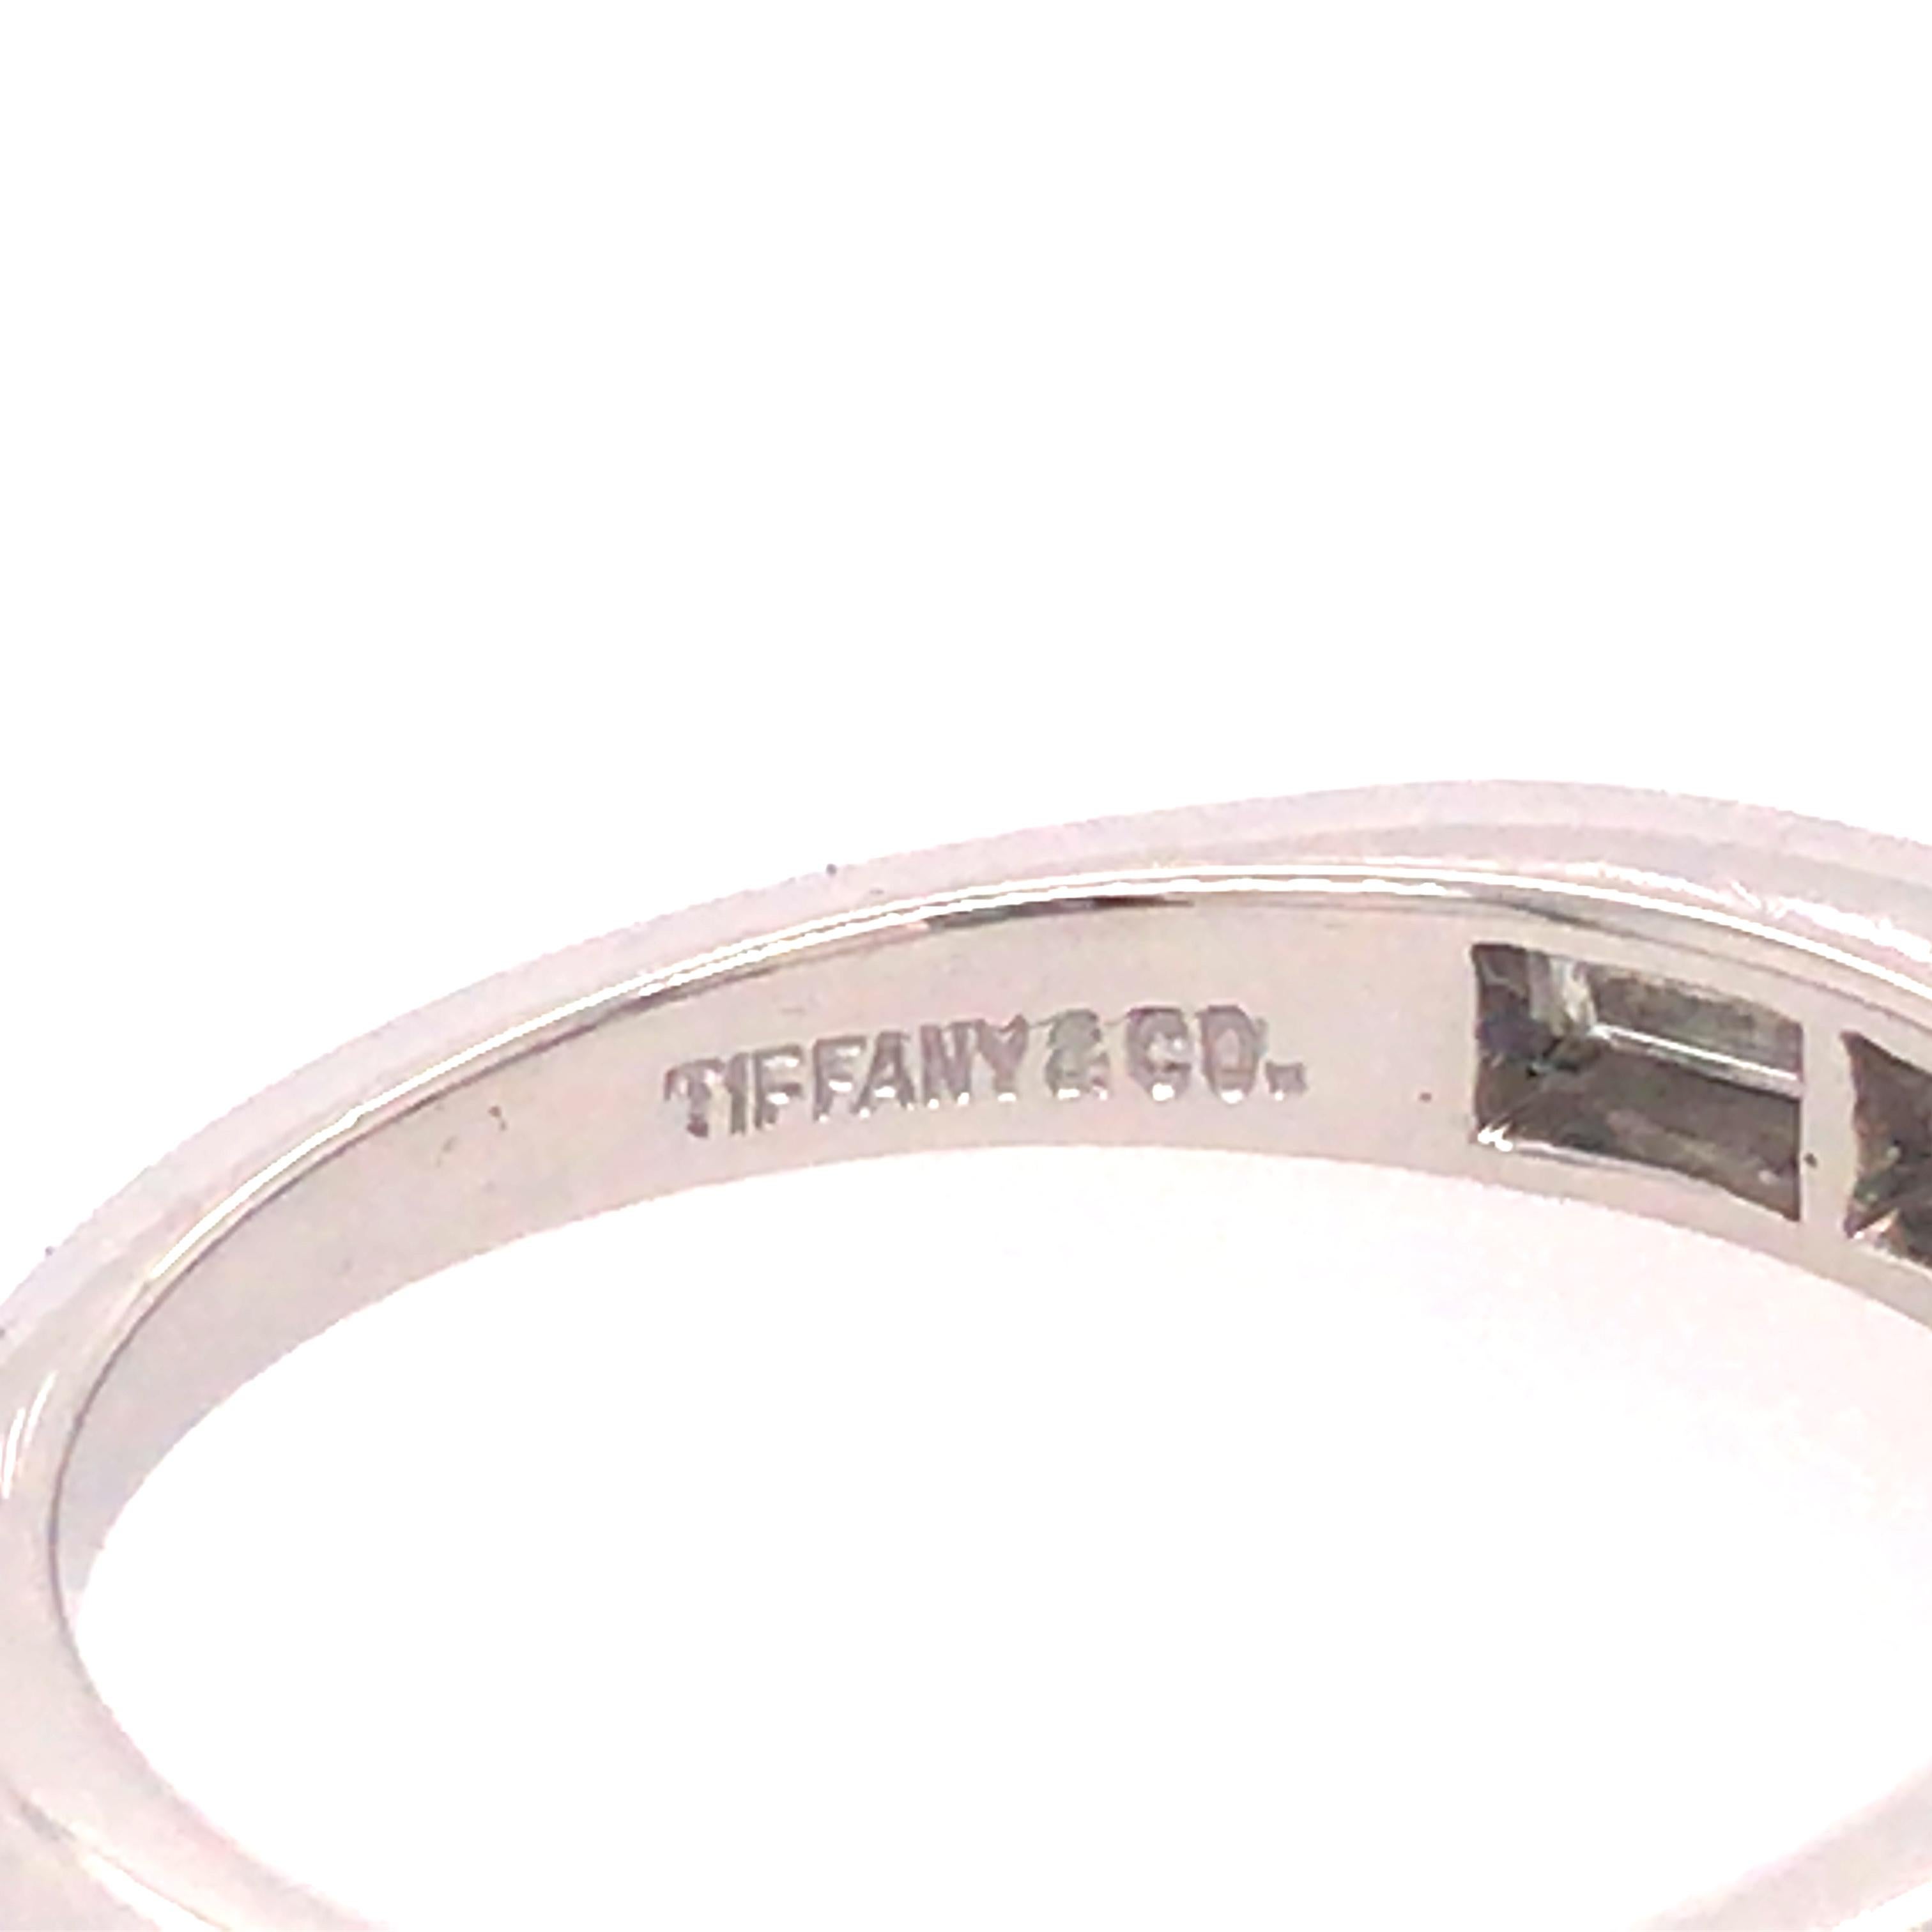 Tiffany & Co. Baguette Diamond Band in Platinum 1